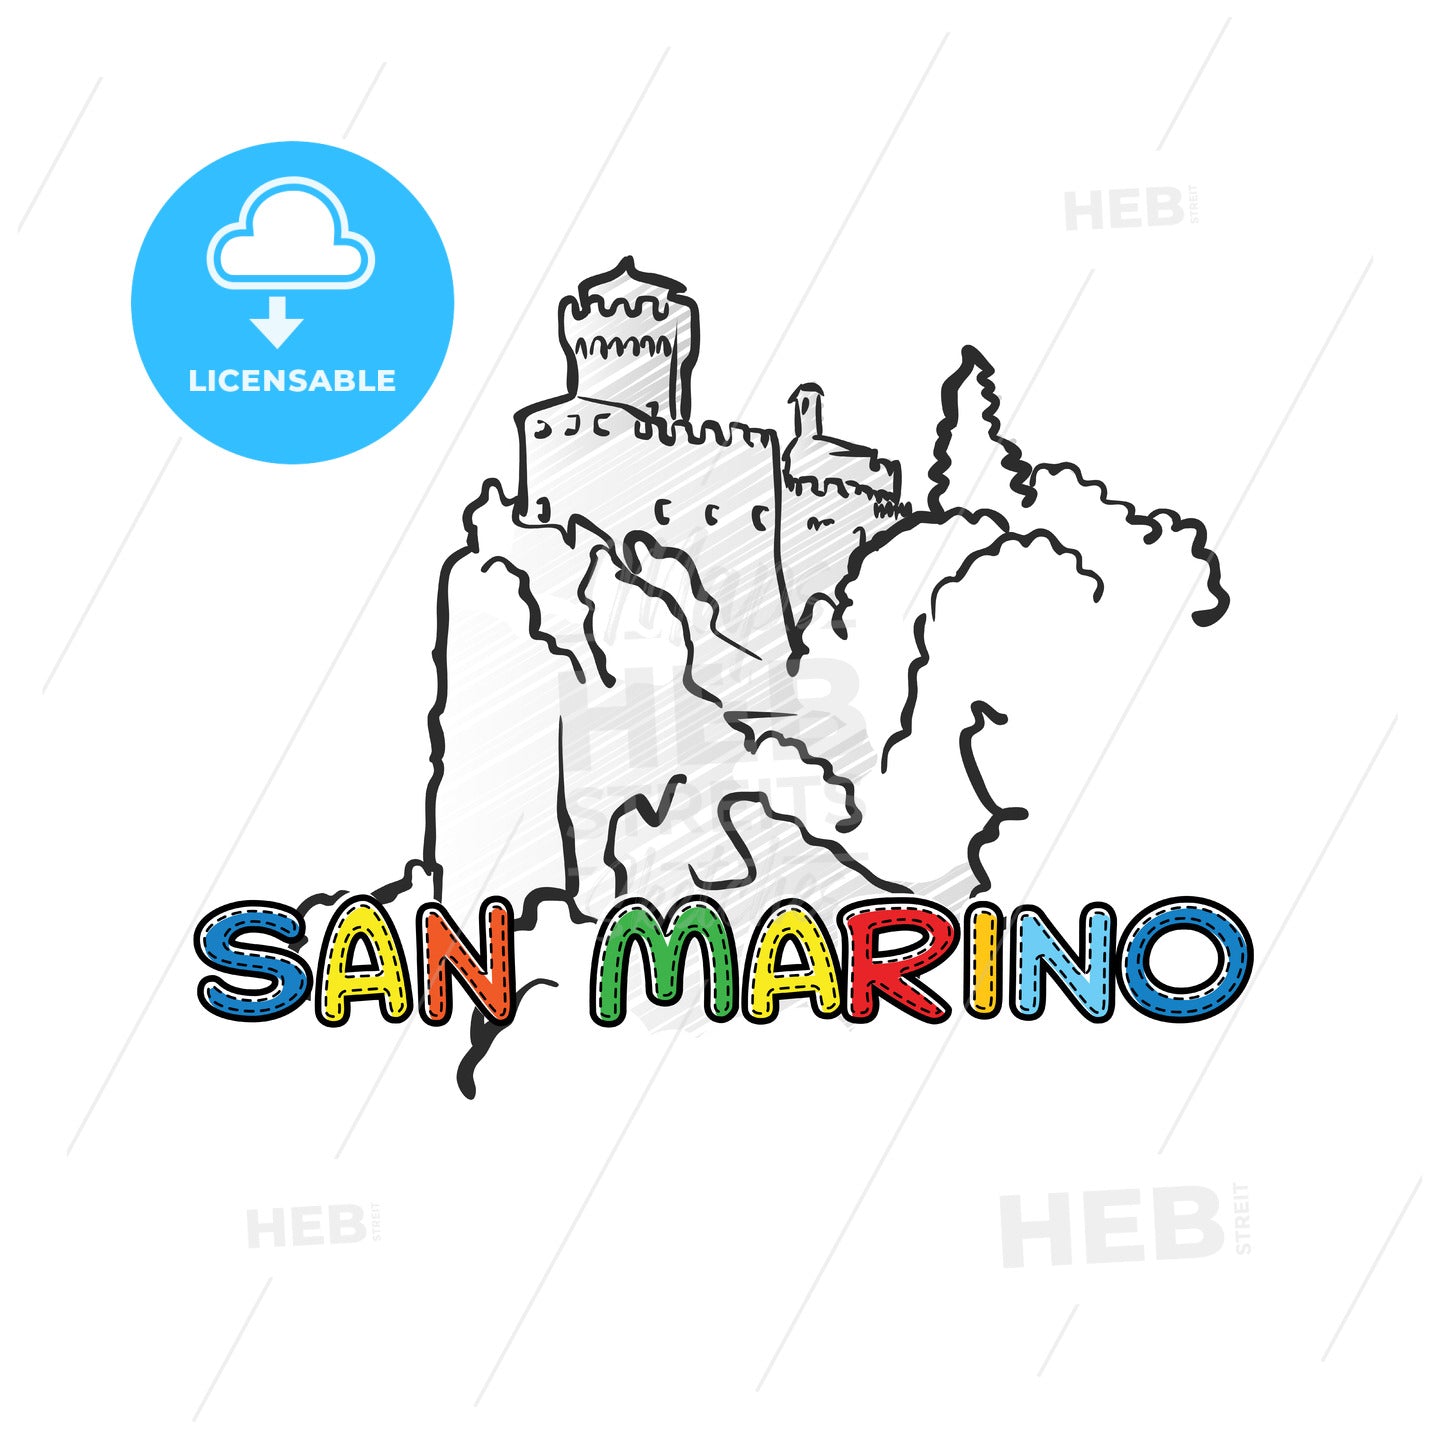 San Marino beautiful sketched icon – instant download